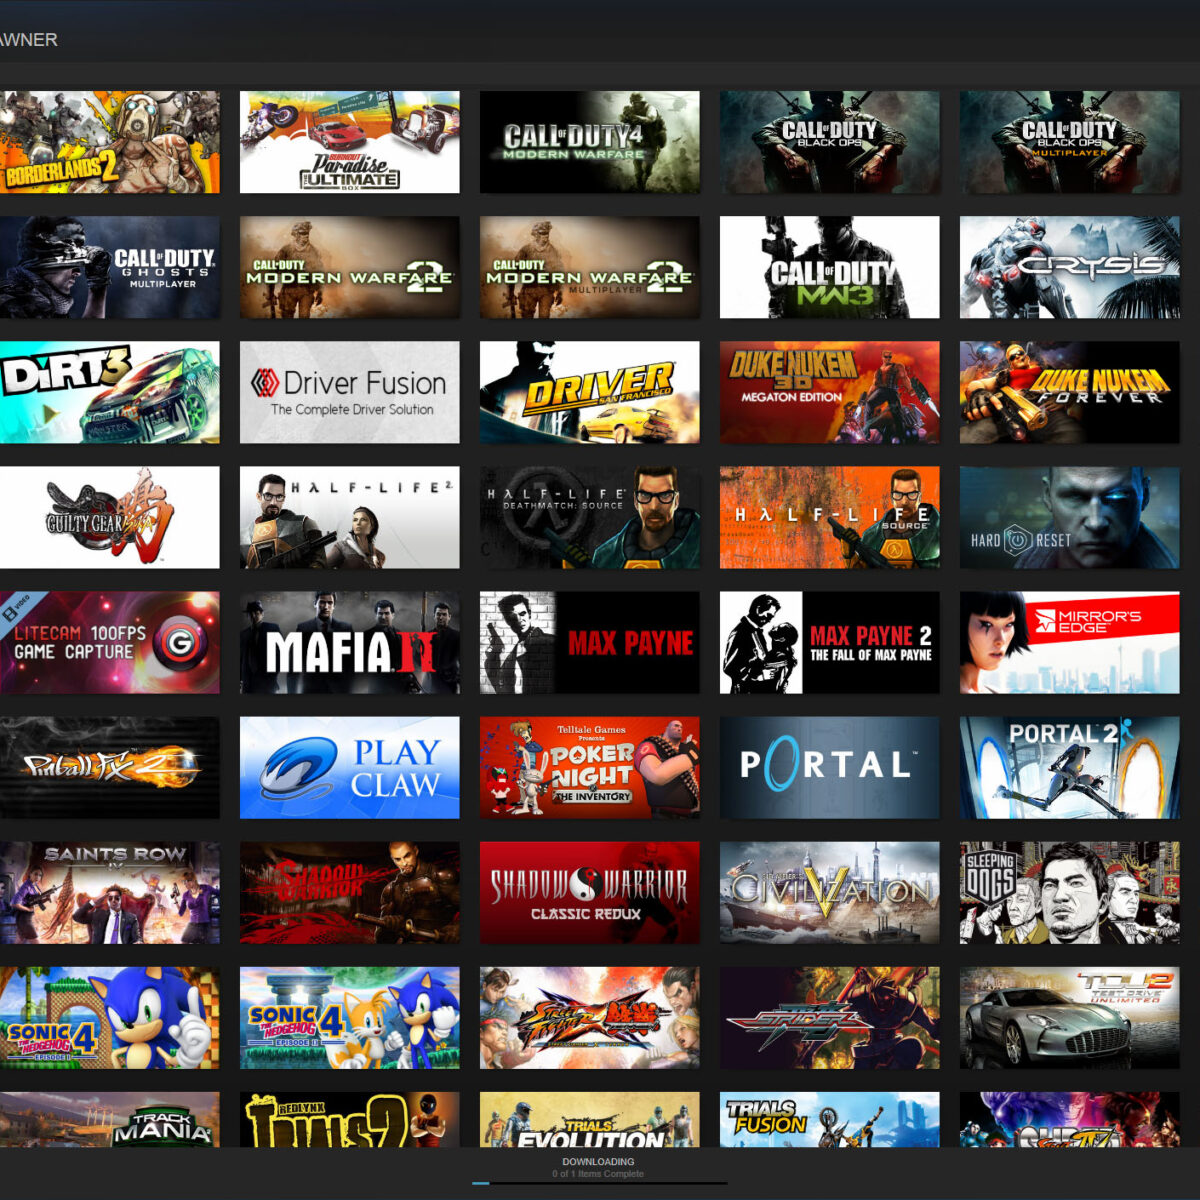 Steam Kicks-off Biggest 'Free Weekend' Ever, Gives You 10 Games To